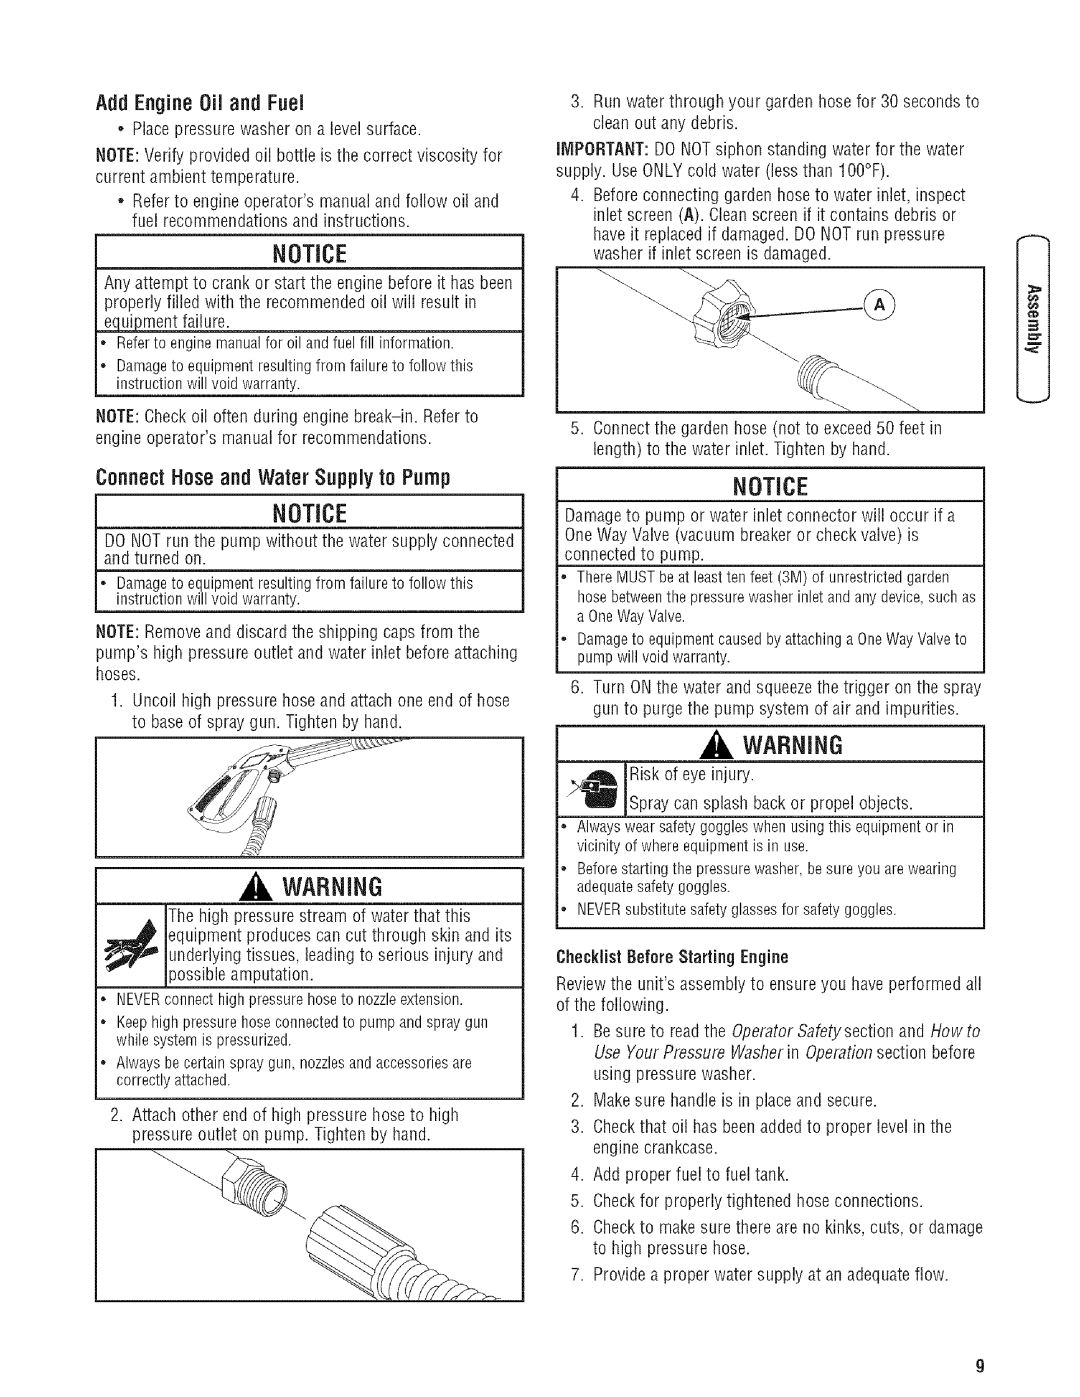 Troy-Bilt 203779GS manual Notice, Add EnjineOil and Fuel, Connect Hose and Water Supply to Pump 